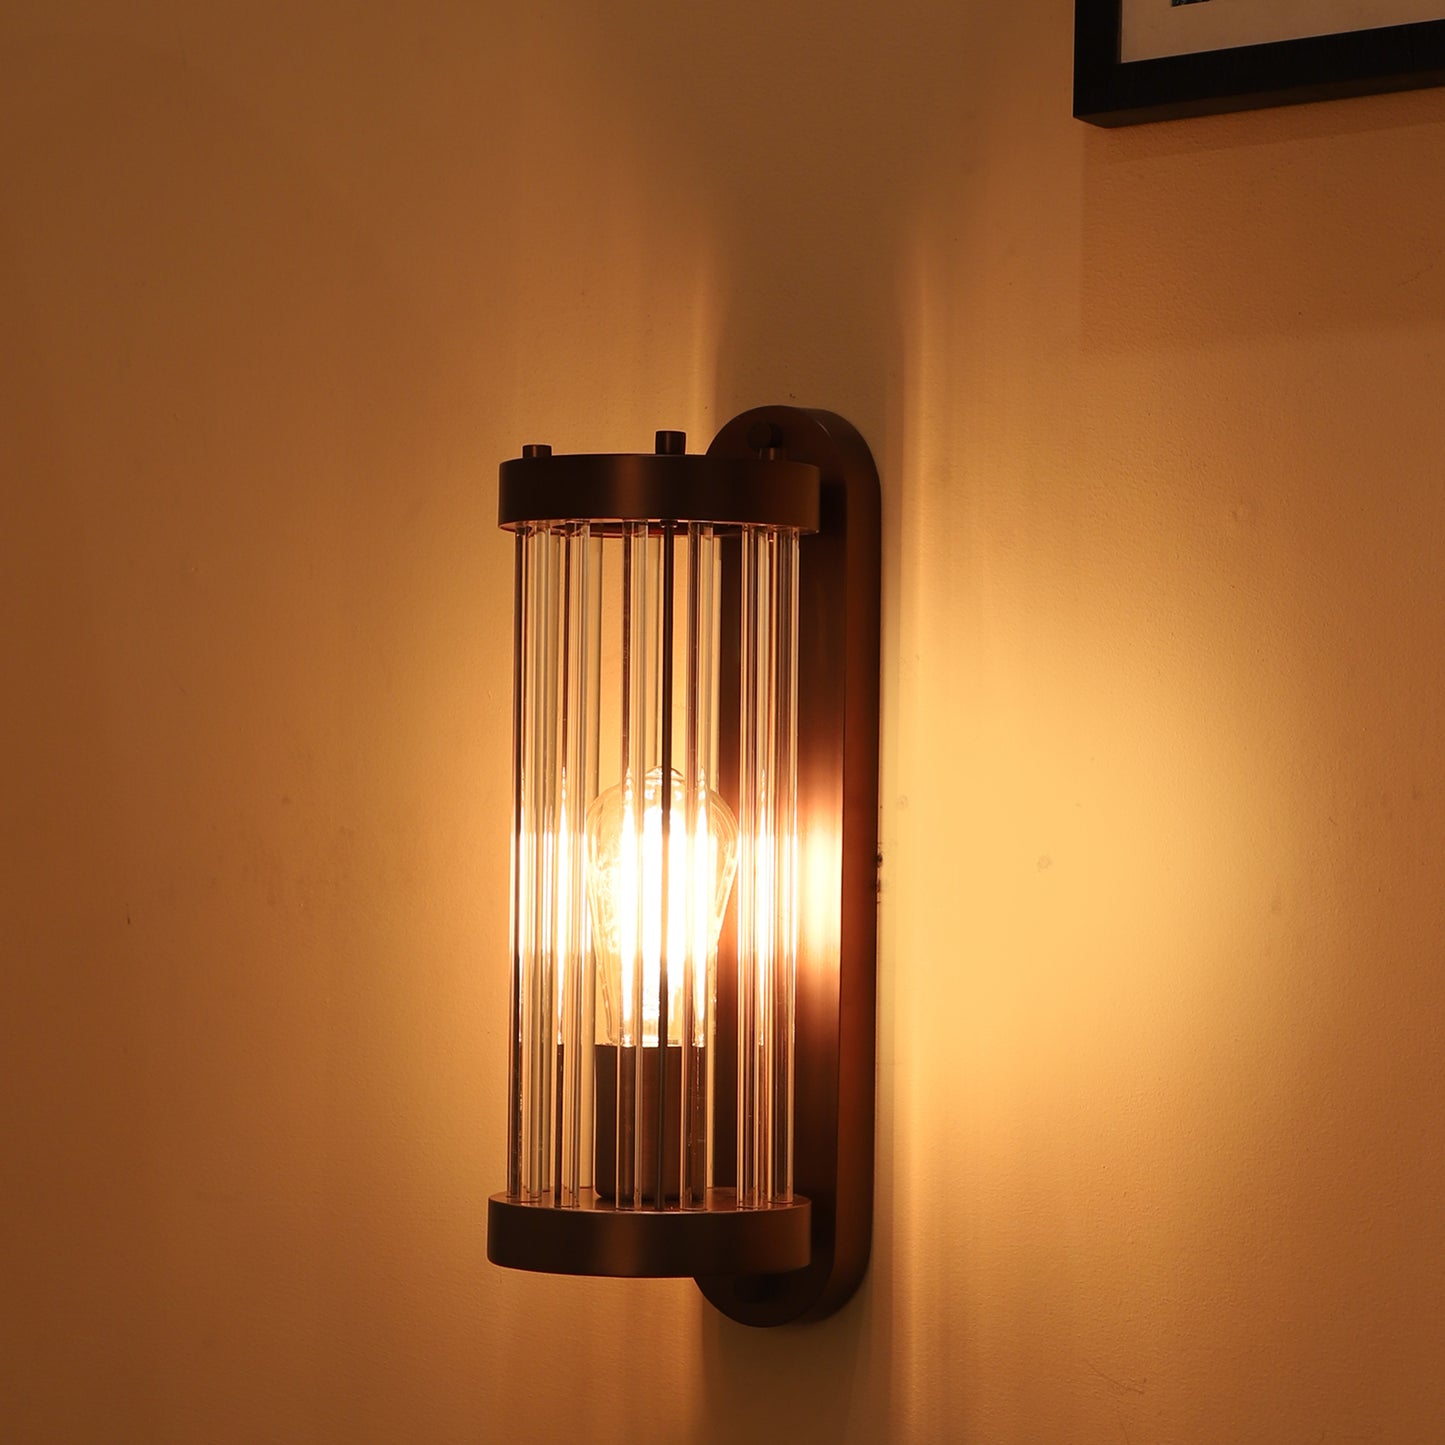 Oval base with glass tube Wall Light